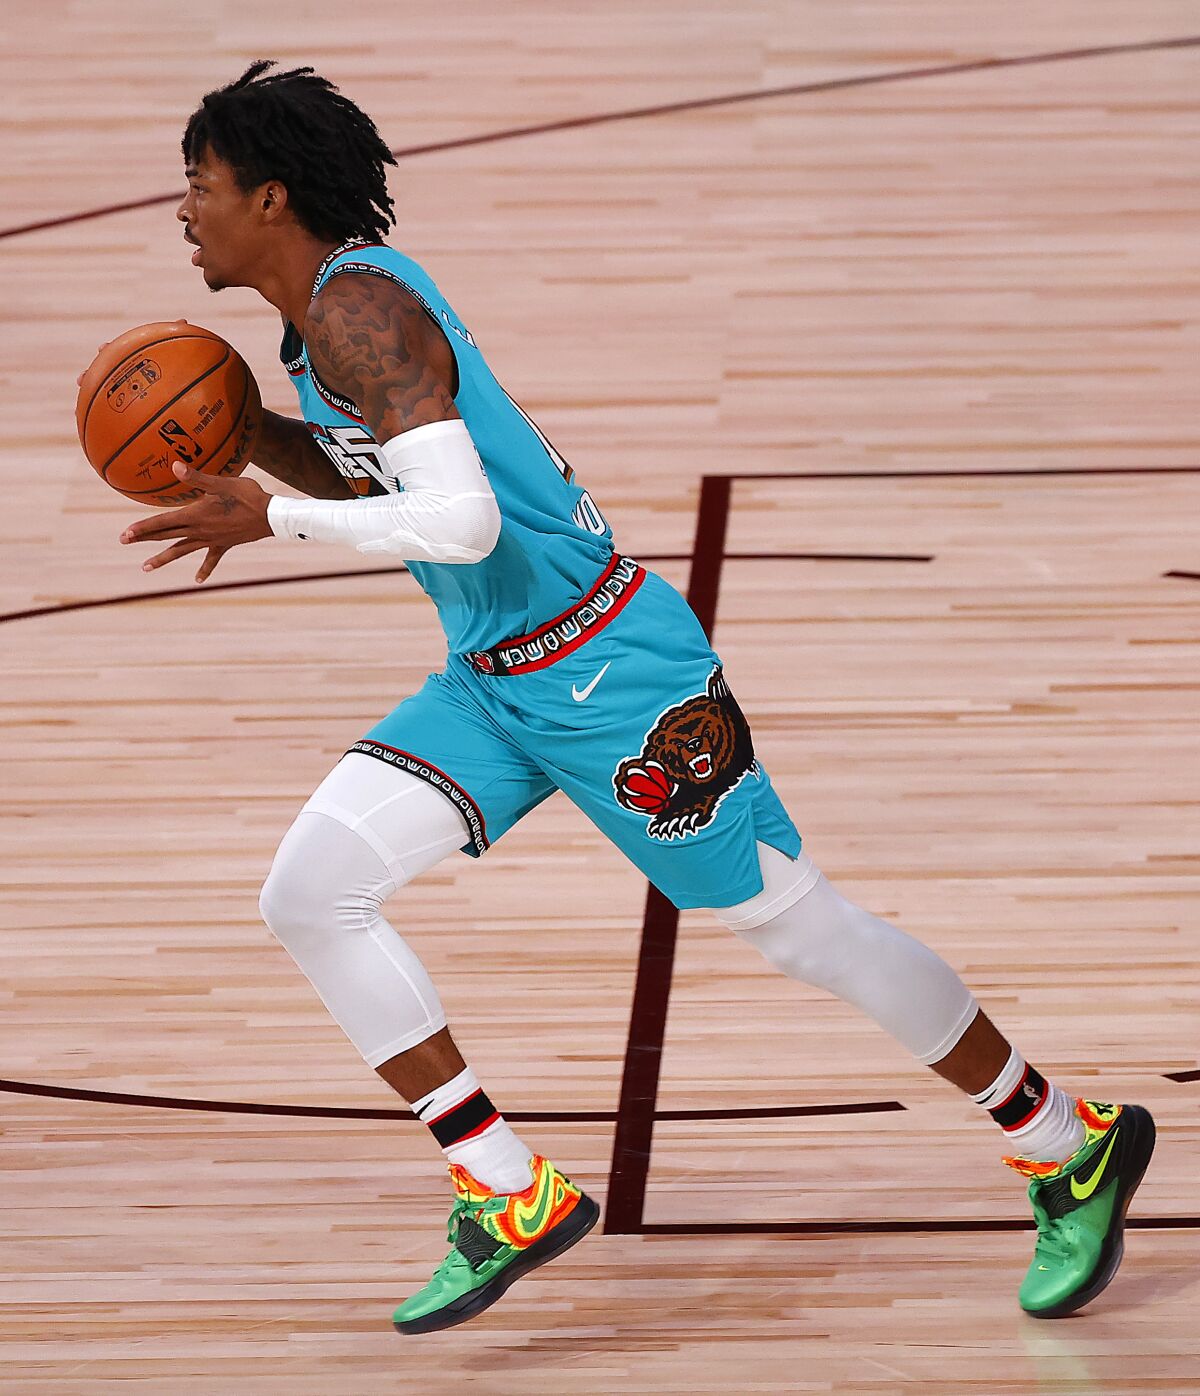 Ja Morant of the Memphis Grizzlies' dribbles the ball down court during the first half of an NBA basketball game Sunday, Aug. 9, 2020, in Lake Buena Vista, Fla. (Kevin C. Cox/Pool Photo via AP)